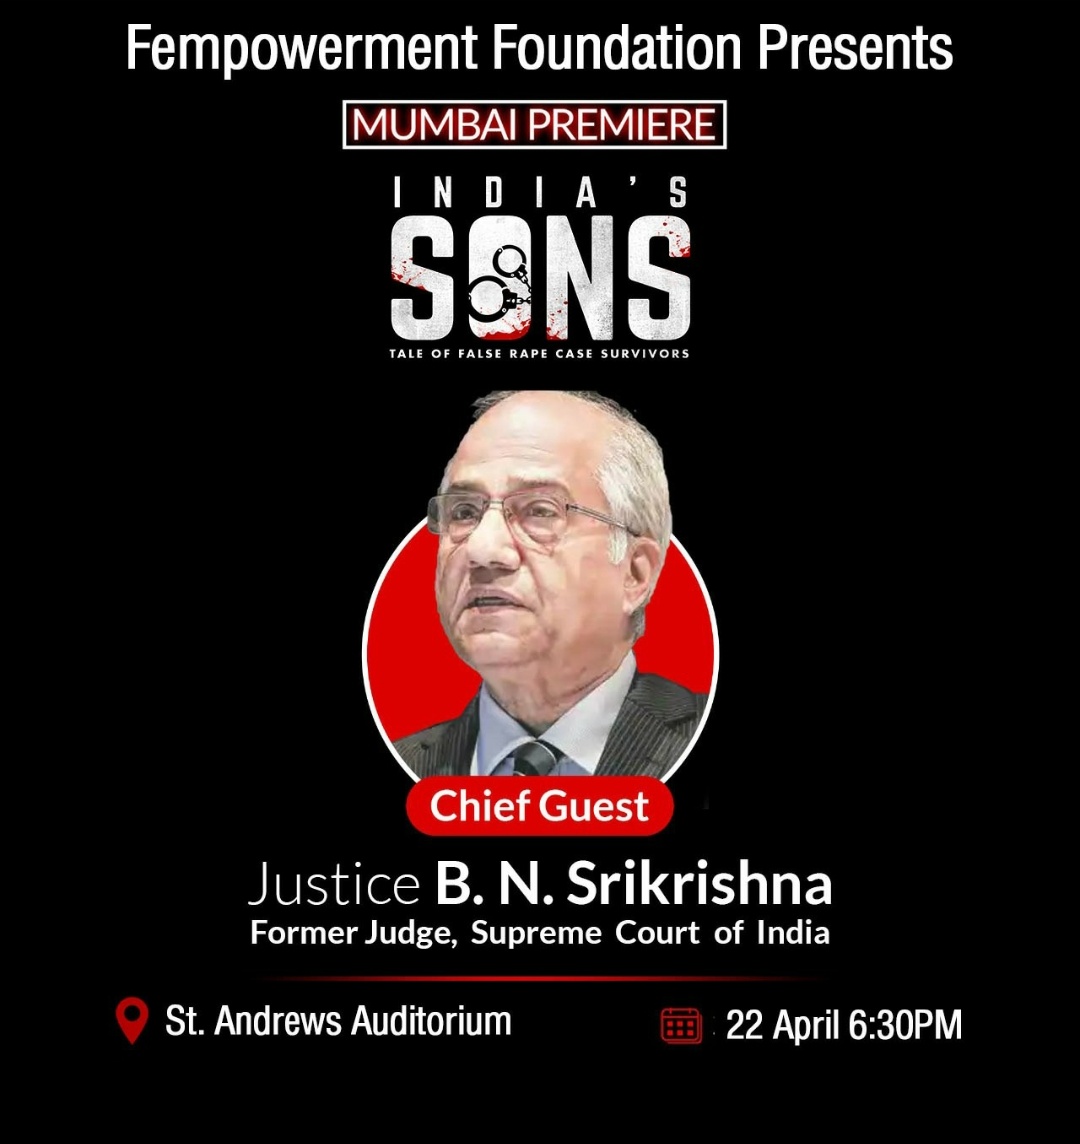 A false accusation of Rape can destroy A life, A whole family in seconds. Join the Mumbai Premiere of #IndiaSons a documentary film by @DeepikaBhardwaj showcasing the misuse of Rape Laws.Former Judge of #SupremeCourtofIndia Justice B. N.Srikrishna will be the Chief Guest.